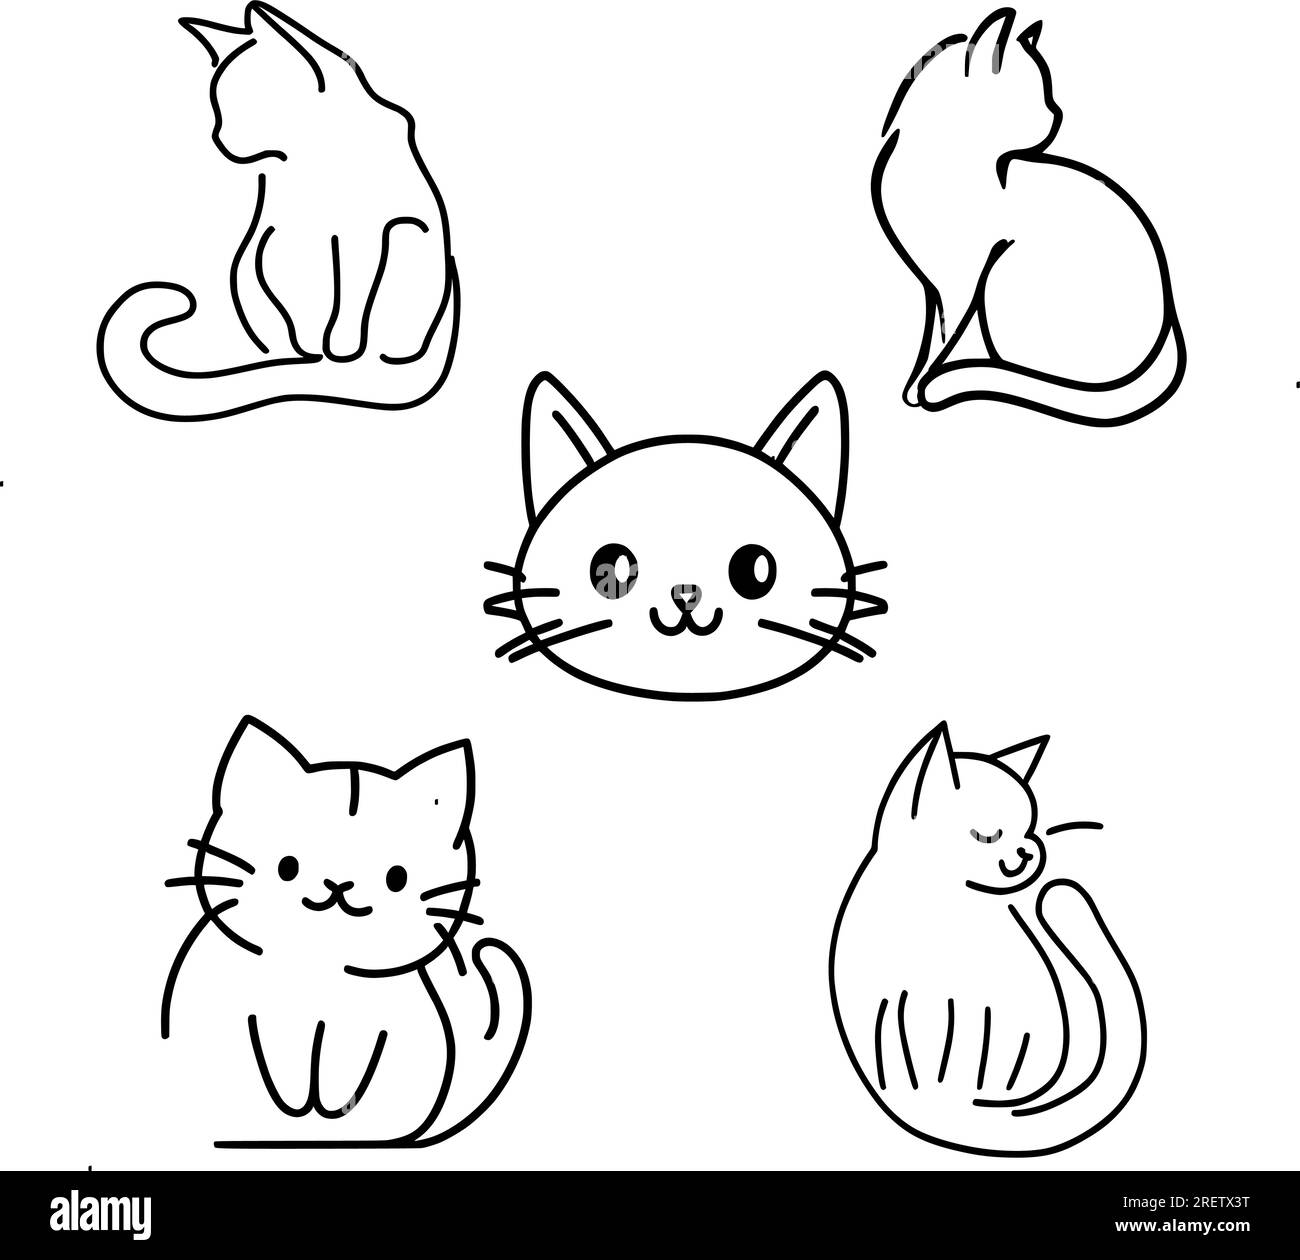 Download Cute Mochi Cat Drawing Picture | Wallpapers.com-saigonsouth.com.vn